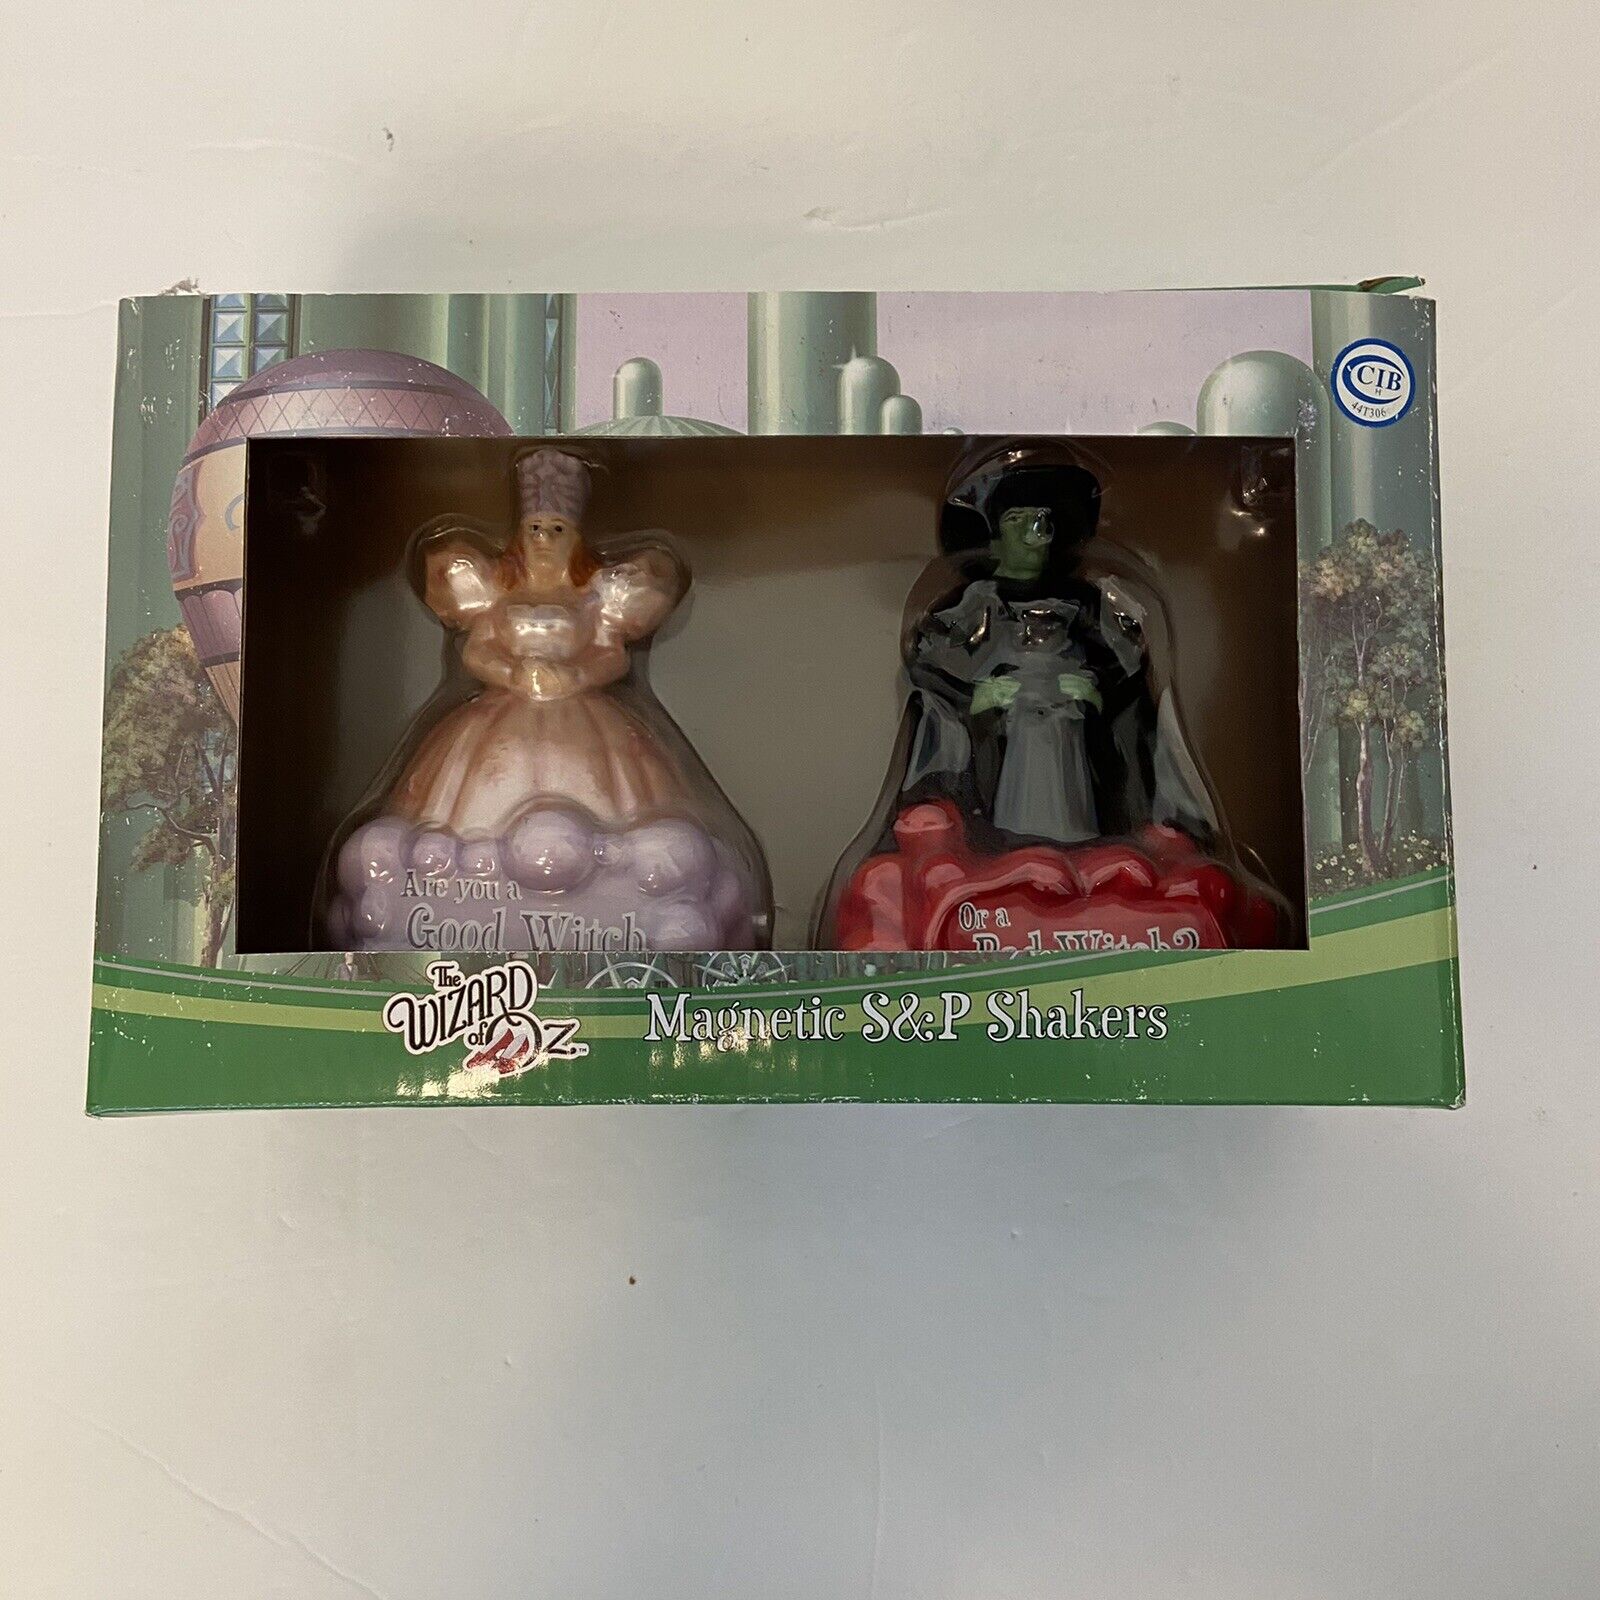 The Wizard of Oz Magnetic Good Ceramic Dallas Mall & Salt or Bad Sales Witch